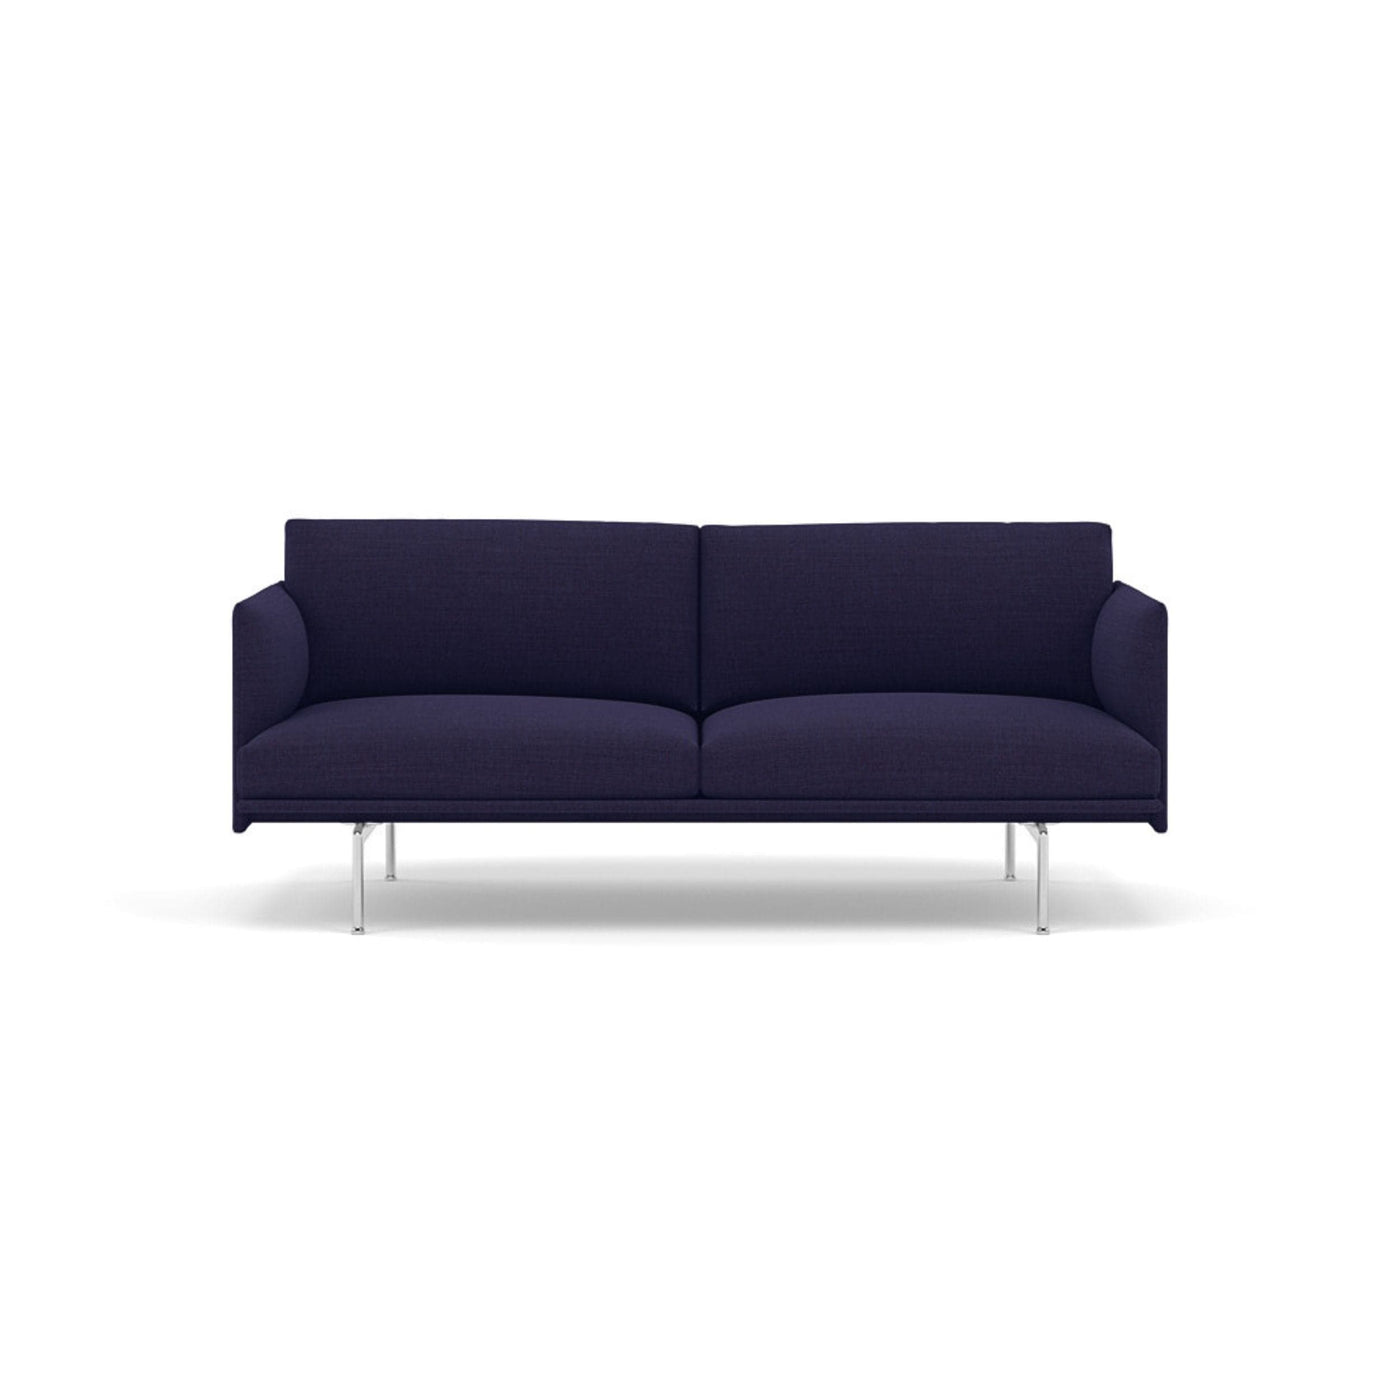 Muuto Outline Studio Sofa 170 in canvas 684 and polished aluminium legs. Made to order from someday designs. #colour_canvas-684-blue